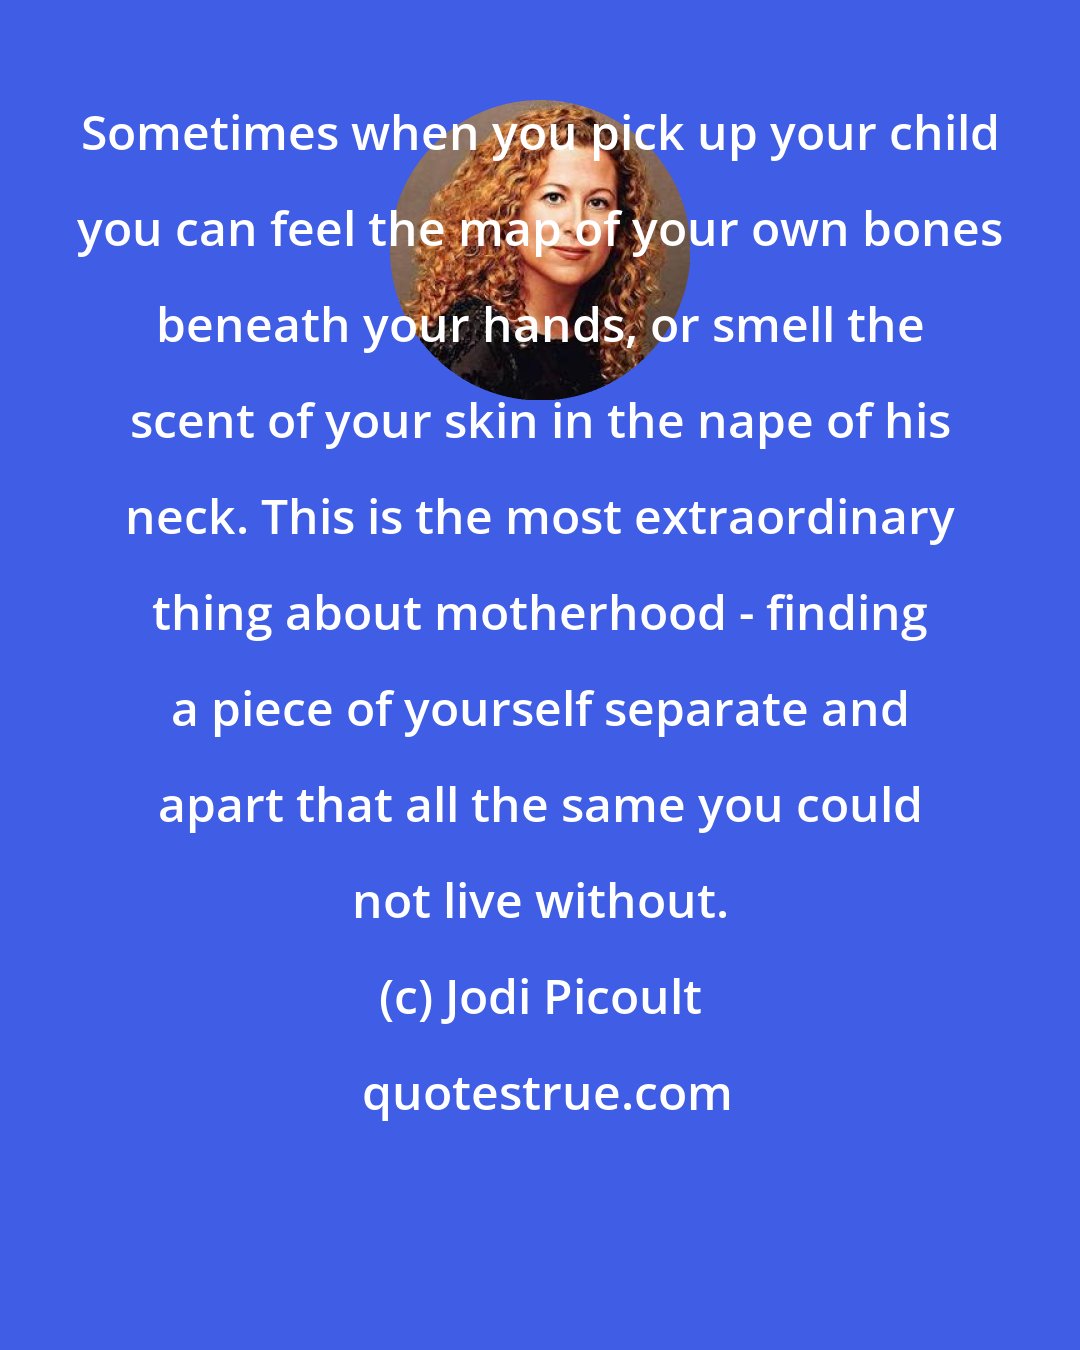 Jodi Picoult: Sometimes when you pick up your child you can feel the map of your own bones beneath your hands, or smell the scent of your skin in the nape of his neck. This is the most extraordinary thing about motherhood - finding a piece of yourself separate and apart that all the same you could not live without.